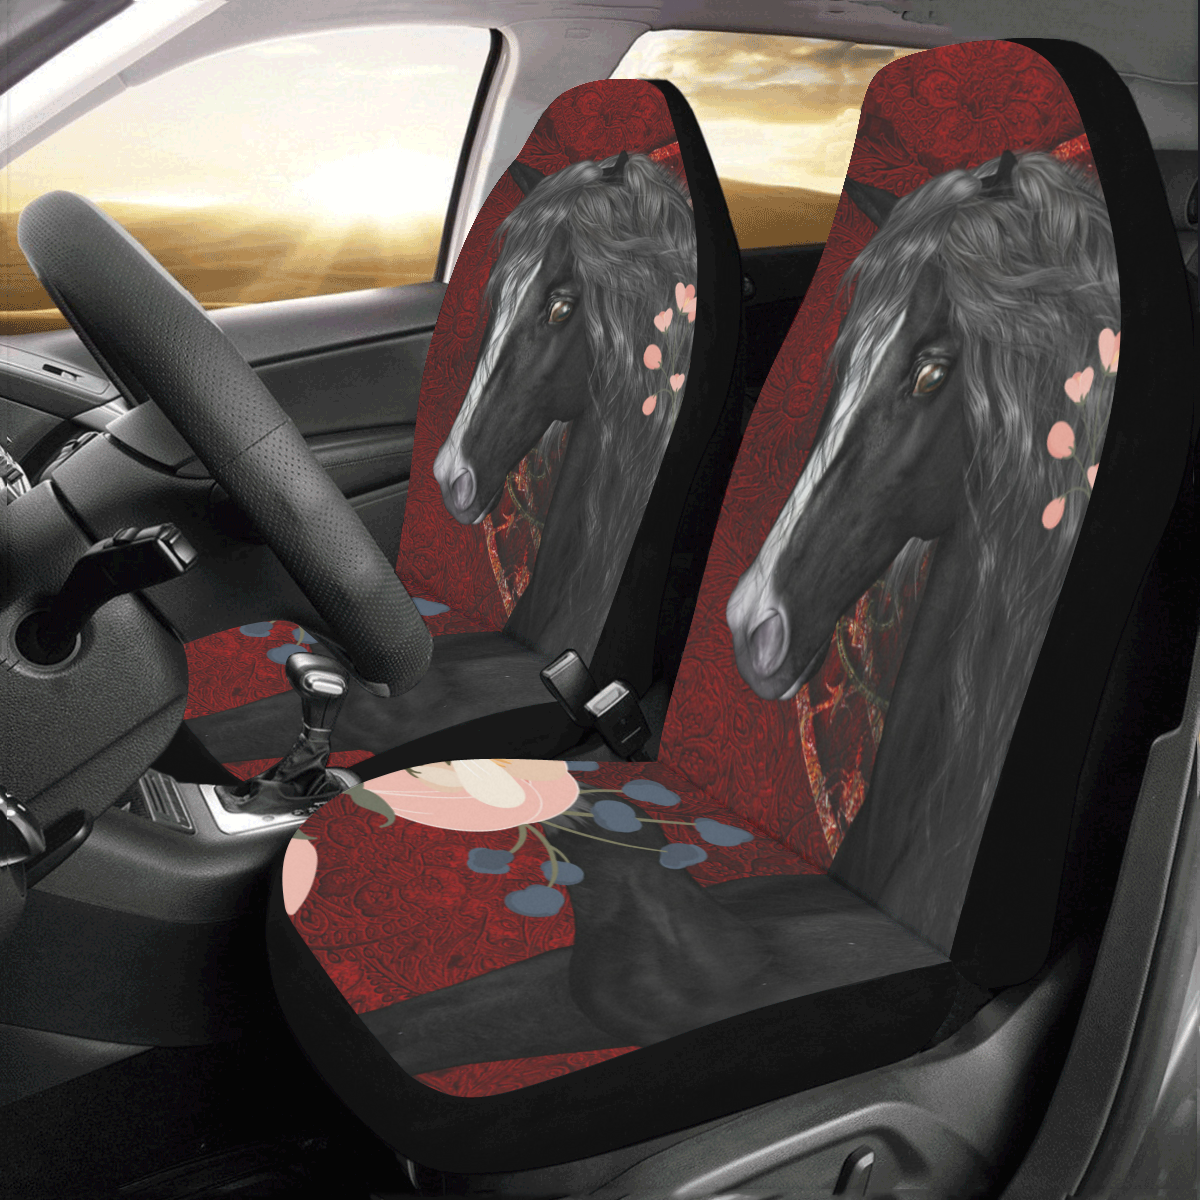 Black horse with flowers Car Seat Covers (Set of 2)